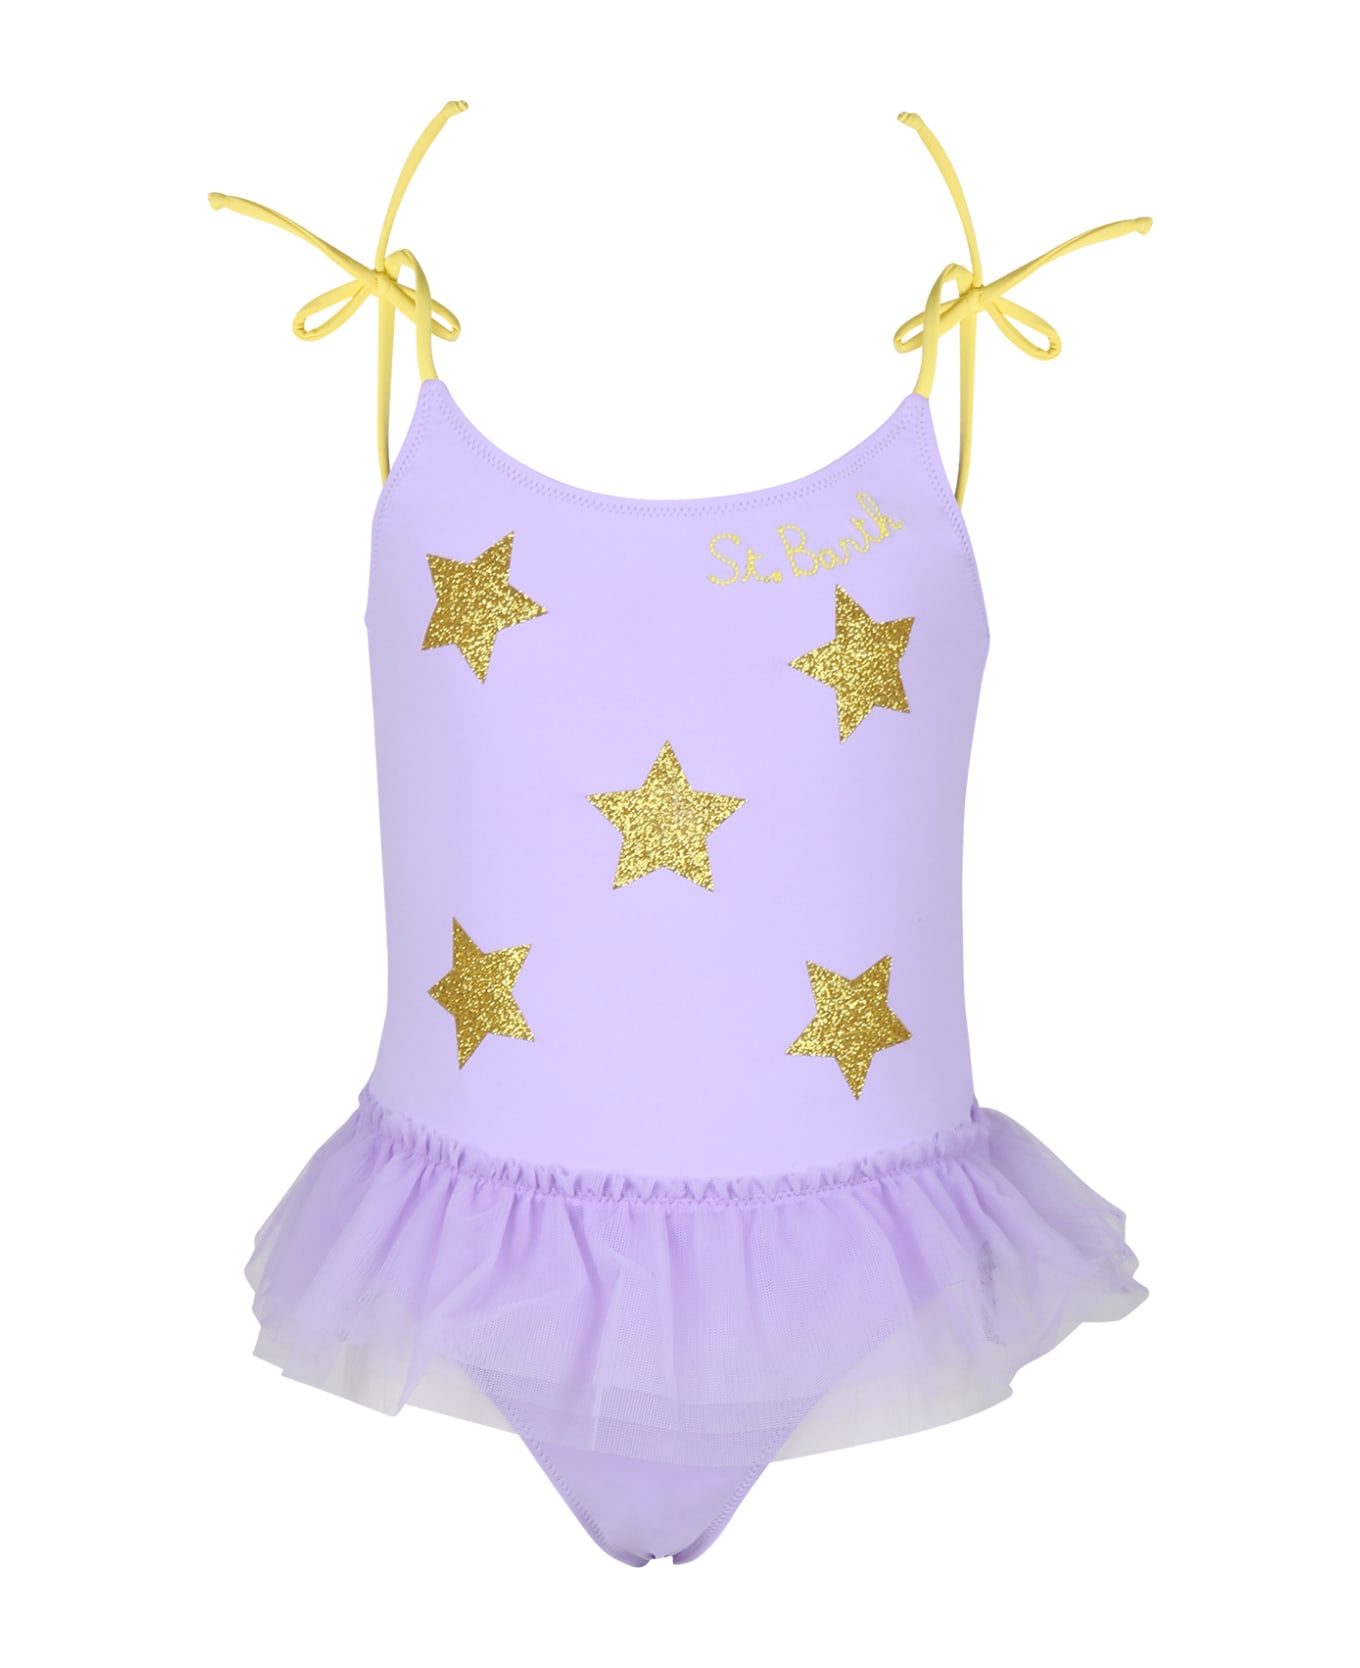 MC2 Saint Barth Purple Swimsuit For Girl With Stars - Violet